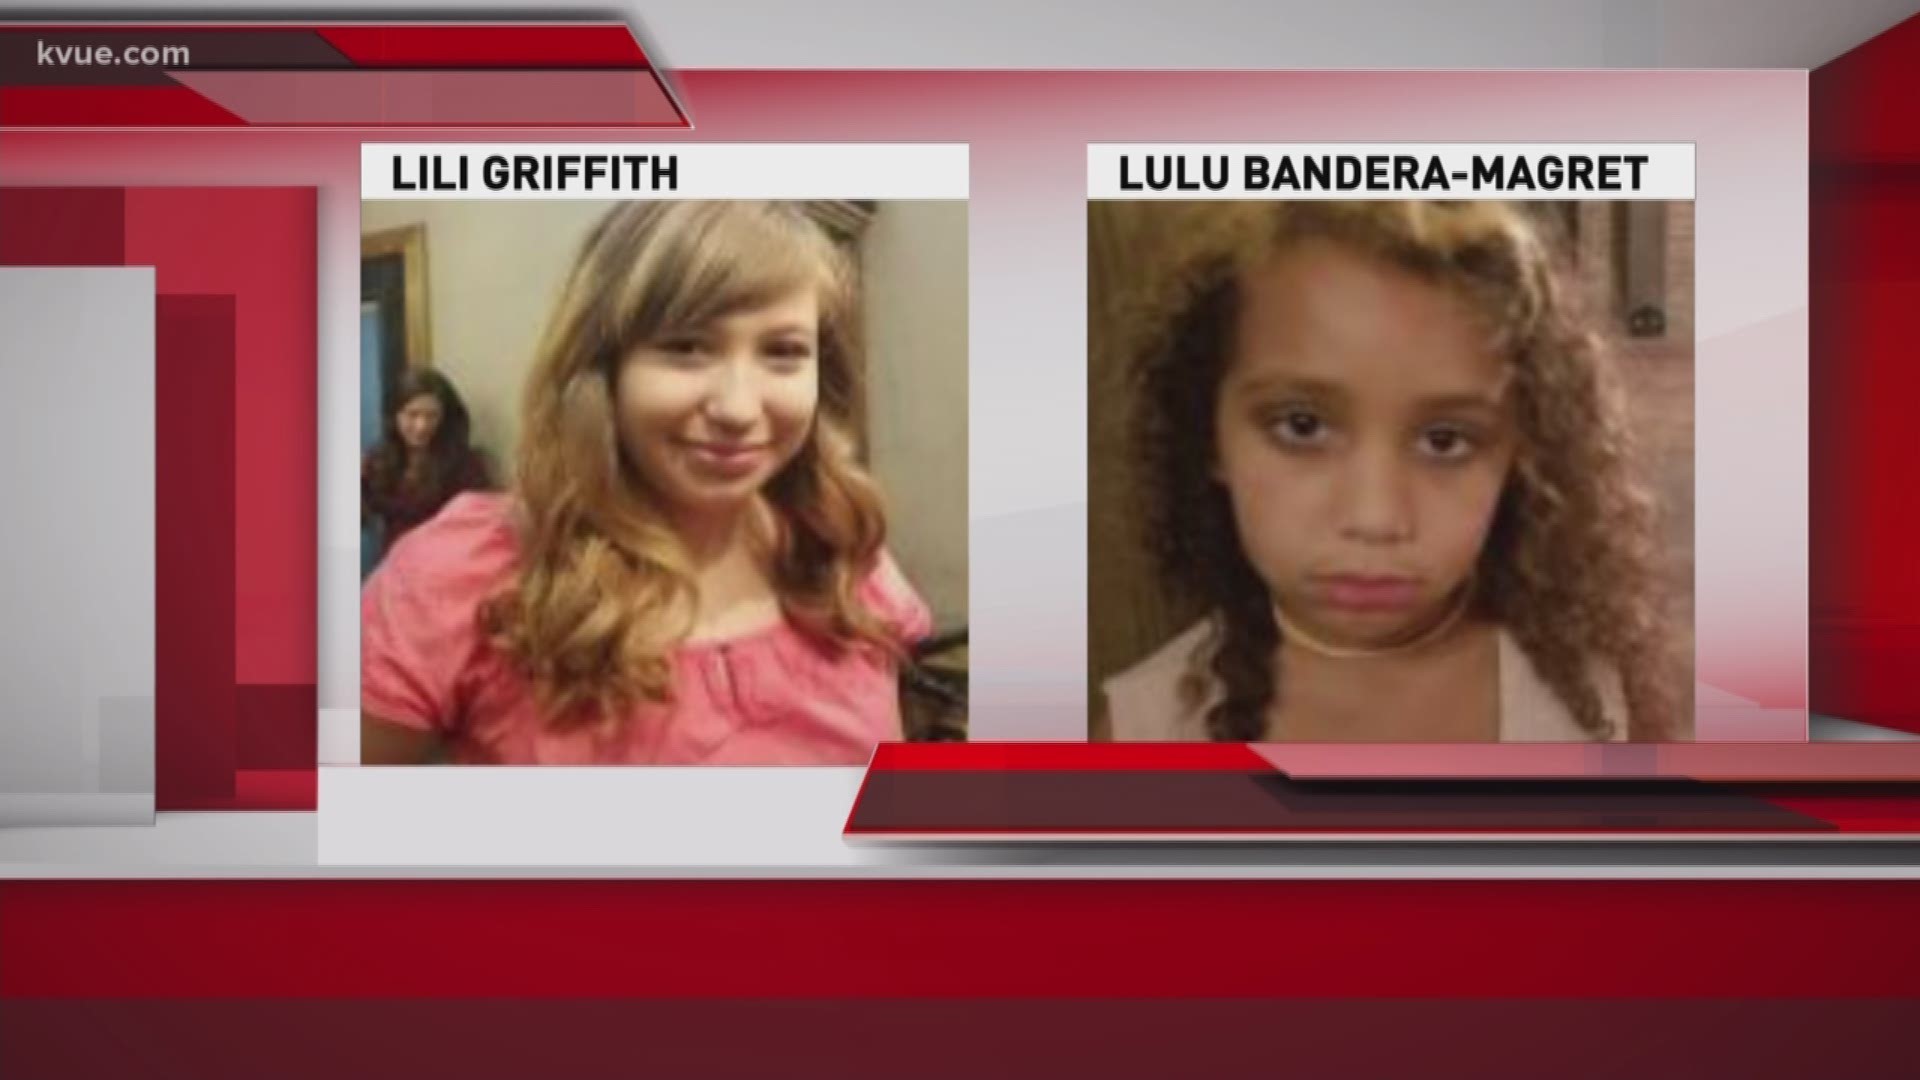 Tonight, officials say two missing Round Rock girls have been found safe. Their accused abductor detained.